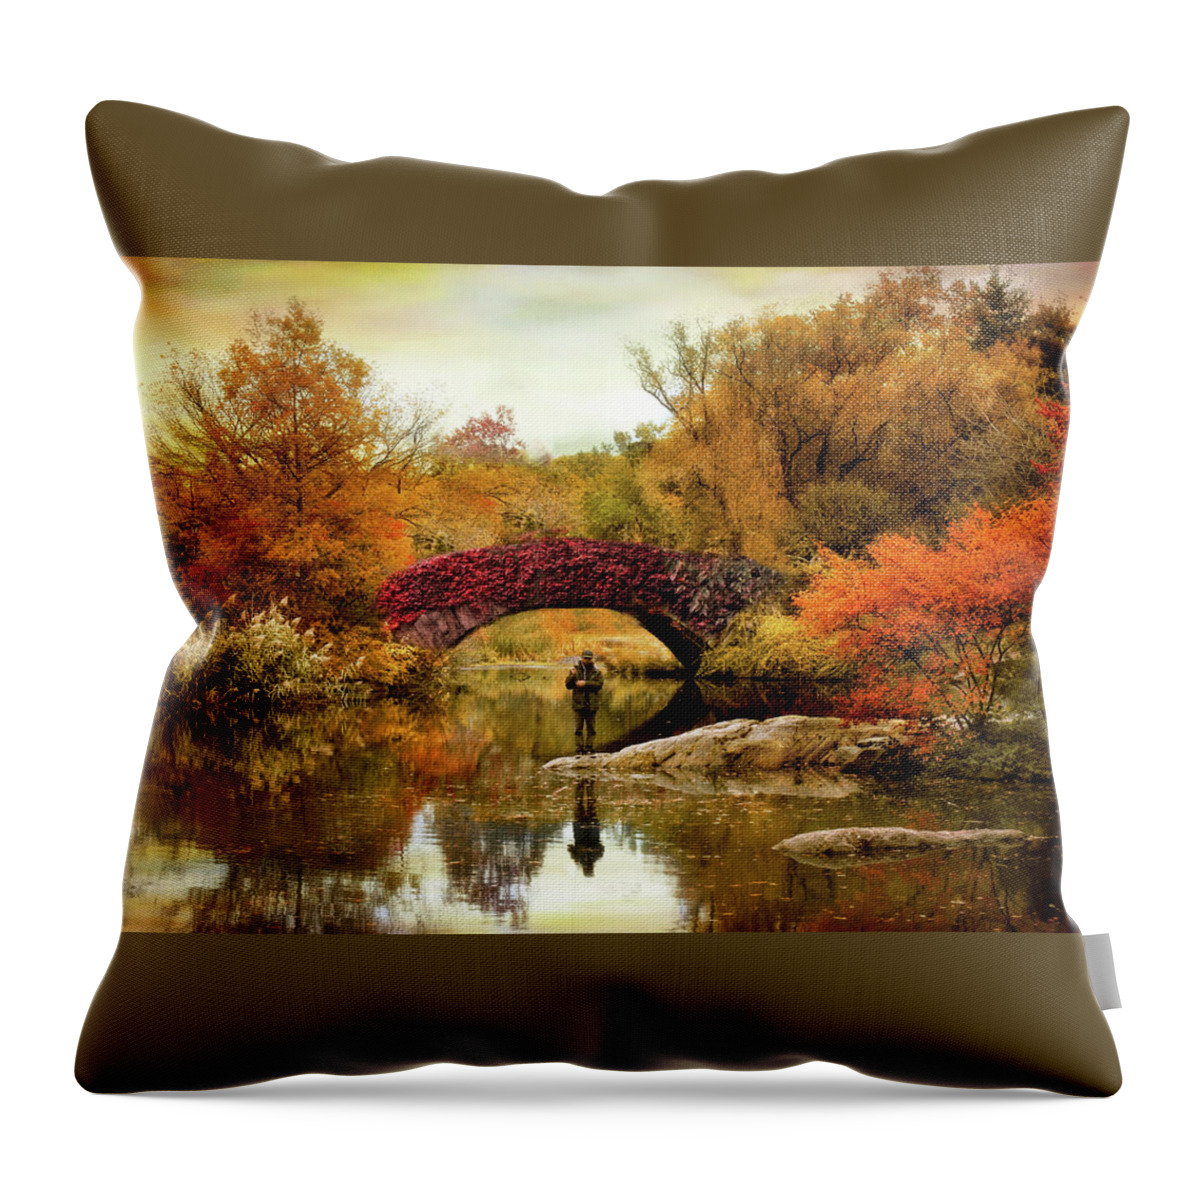 Bridge Throw Pillow featuring the photograph Fishing at Gapstow by Jessica Jenney